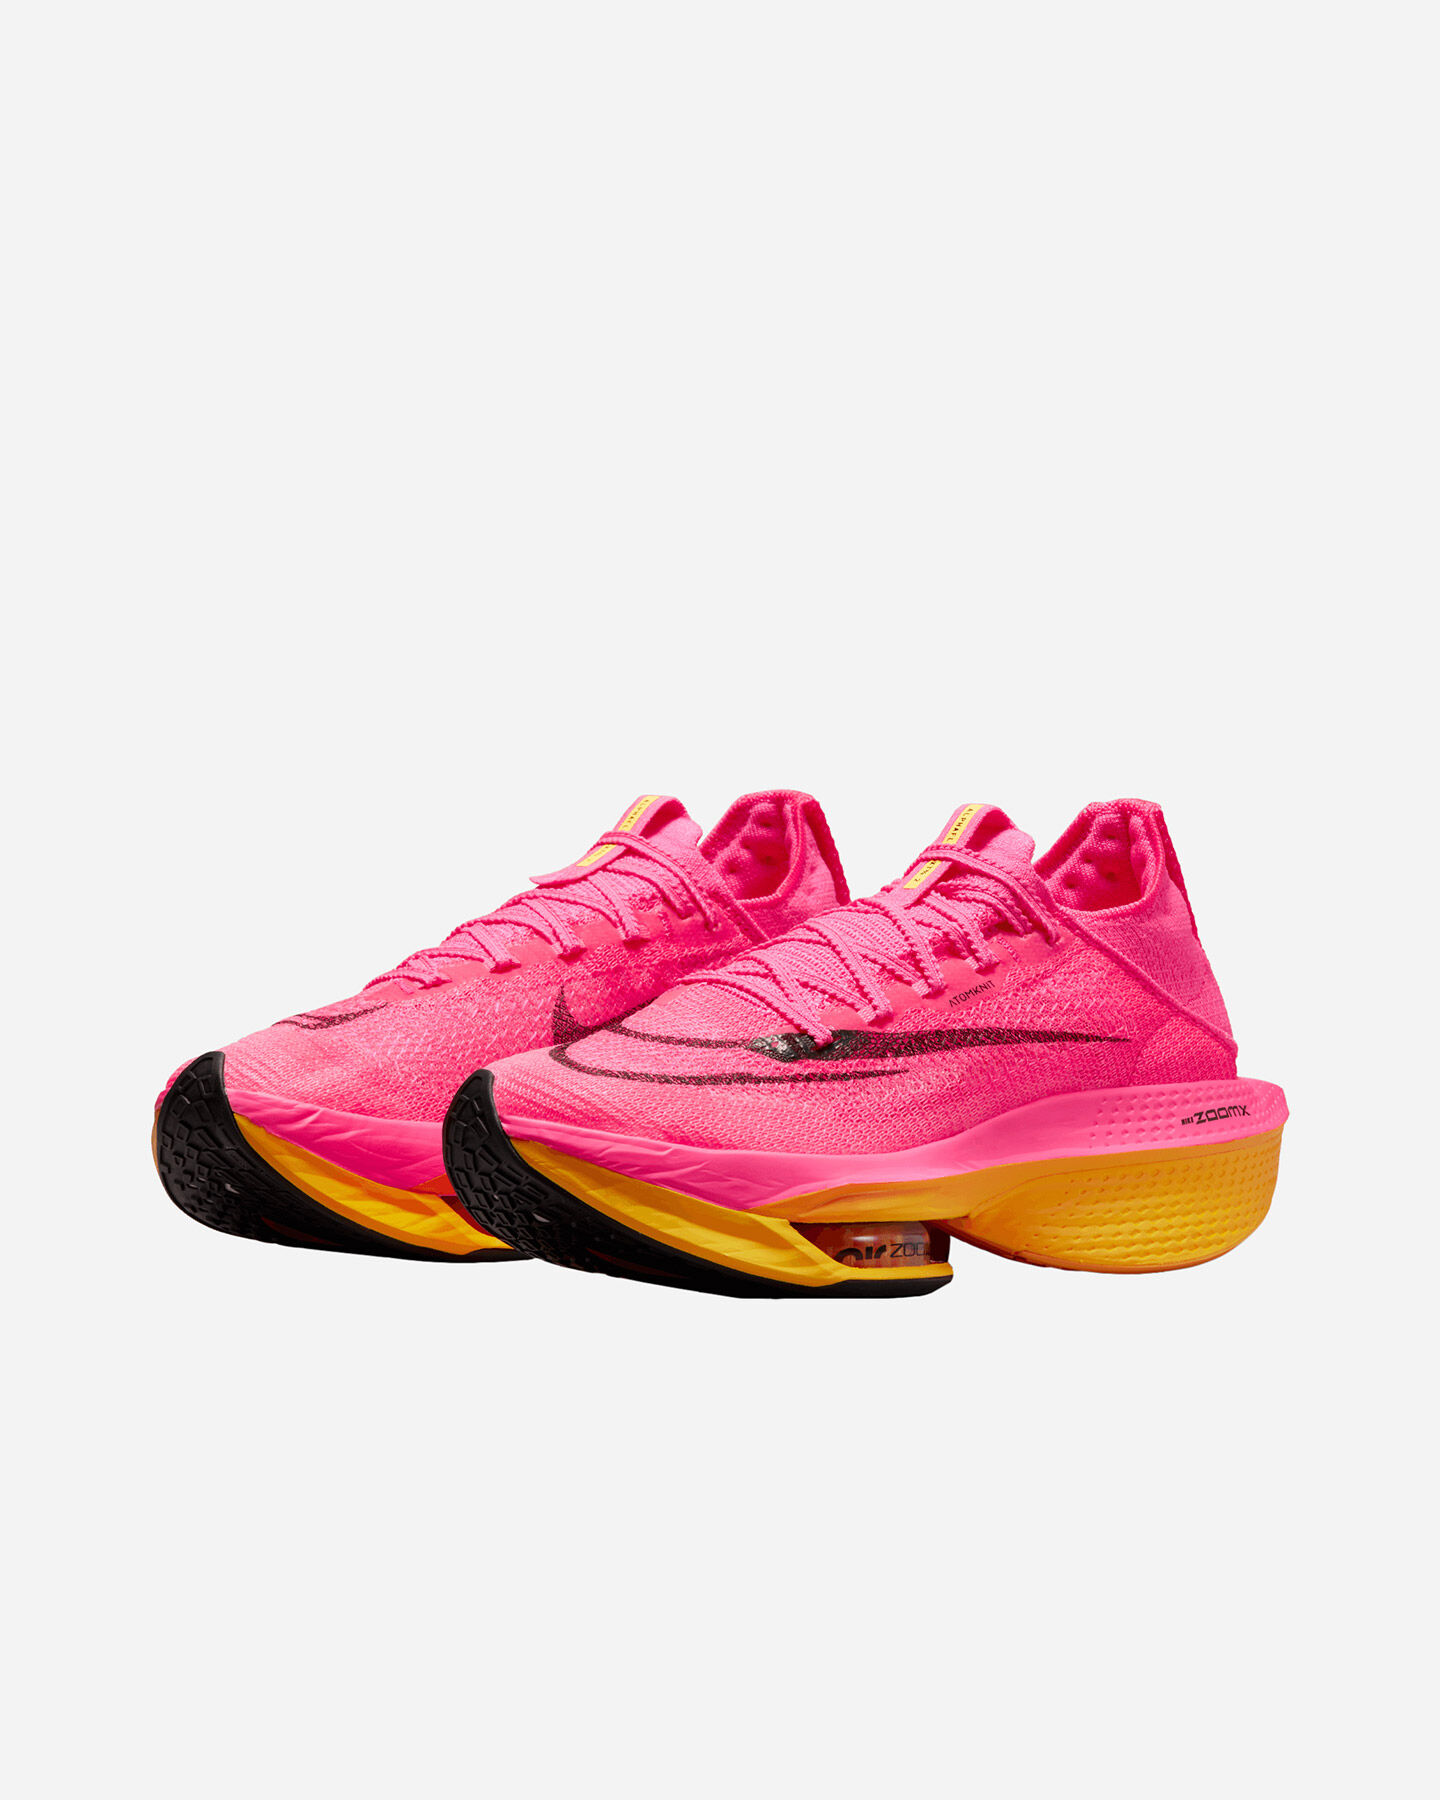  Scarpe running NIKE AIR ZOOM ALPHAFLY NEXT% FLYKNIT W S5530569|600|5.5 scatto 1